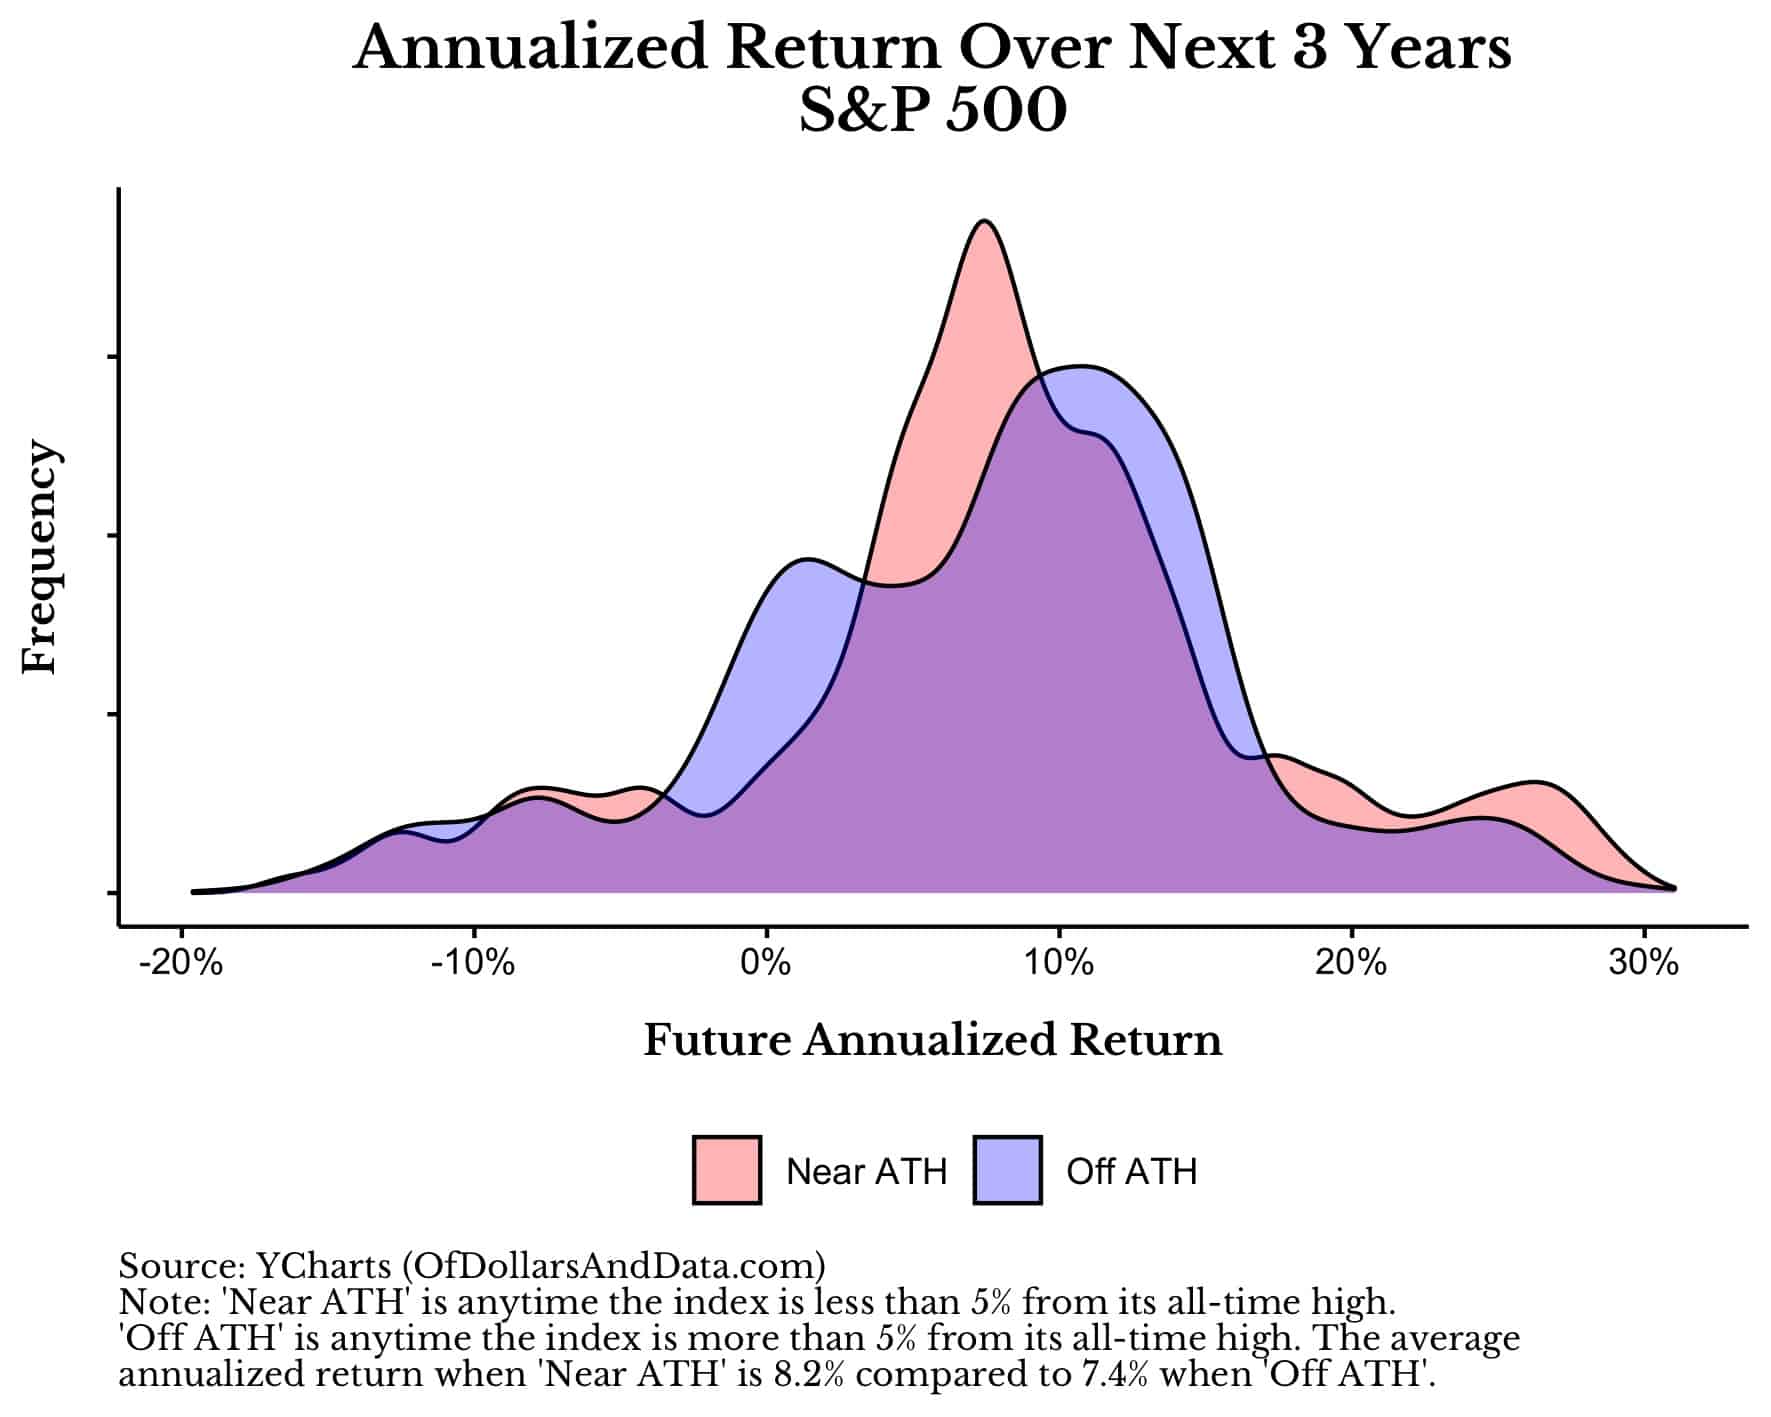 Annualized return distributions for the S&P 500 over the next 3 years near and off all-time highs